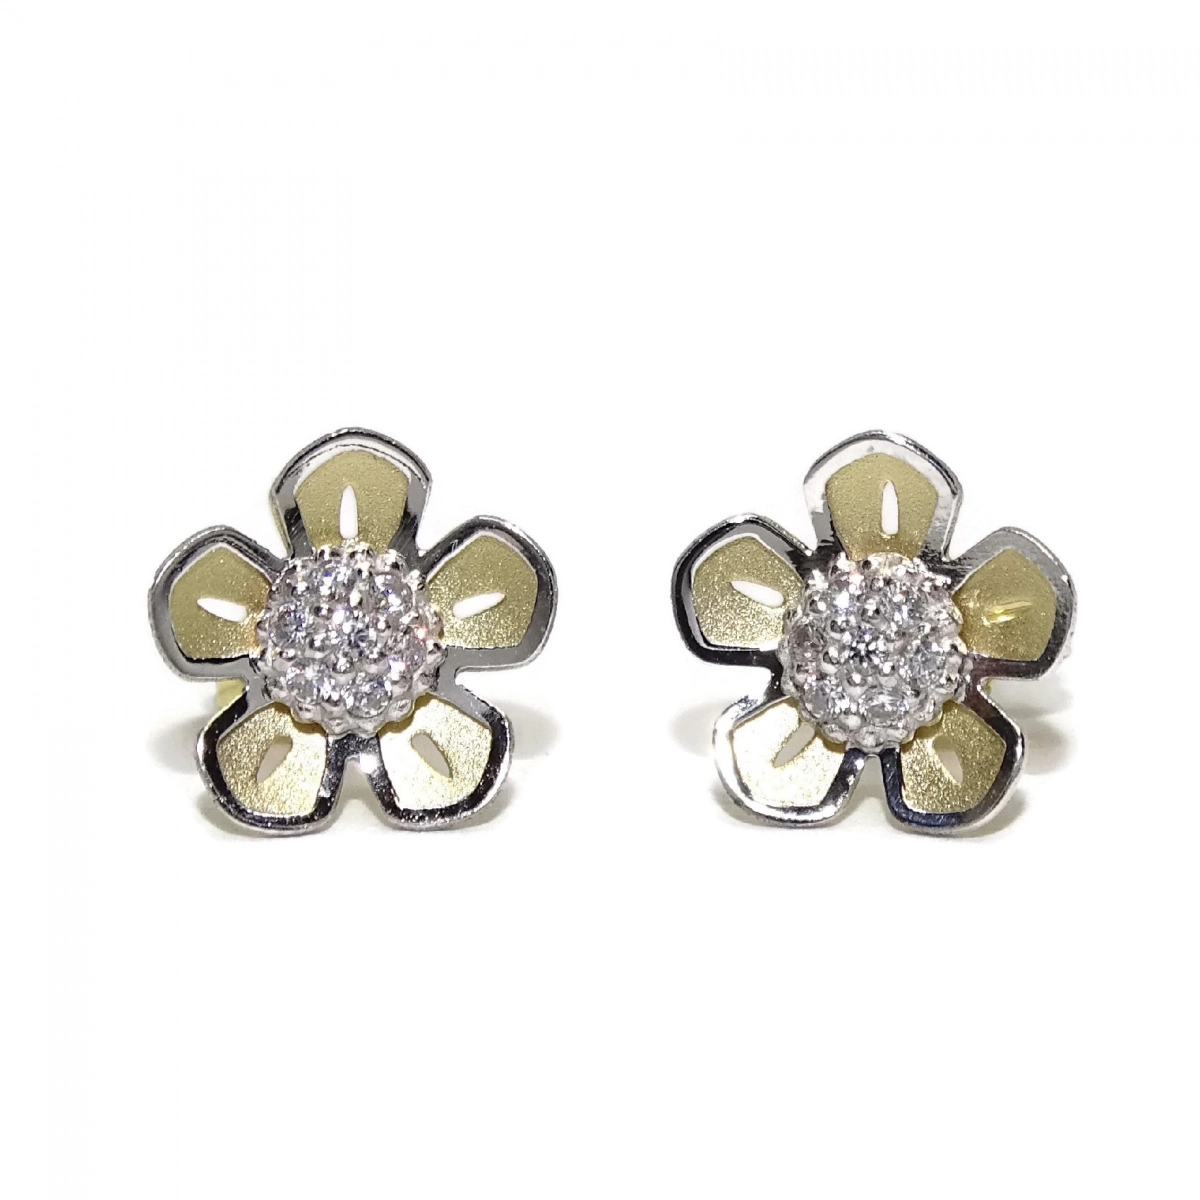 EARRING SPECIAL  MY FIRST COMMUNION  OF YELLOW GOLD AND WHITE GOLD 18KTES WITH ZIRCONS. NEVER SAY NEVER